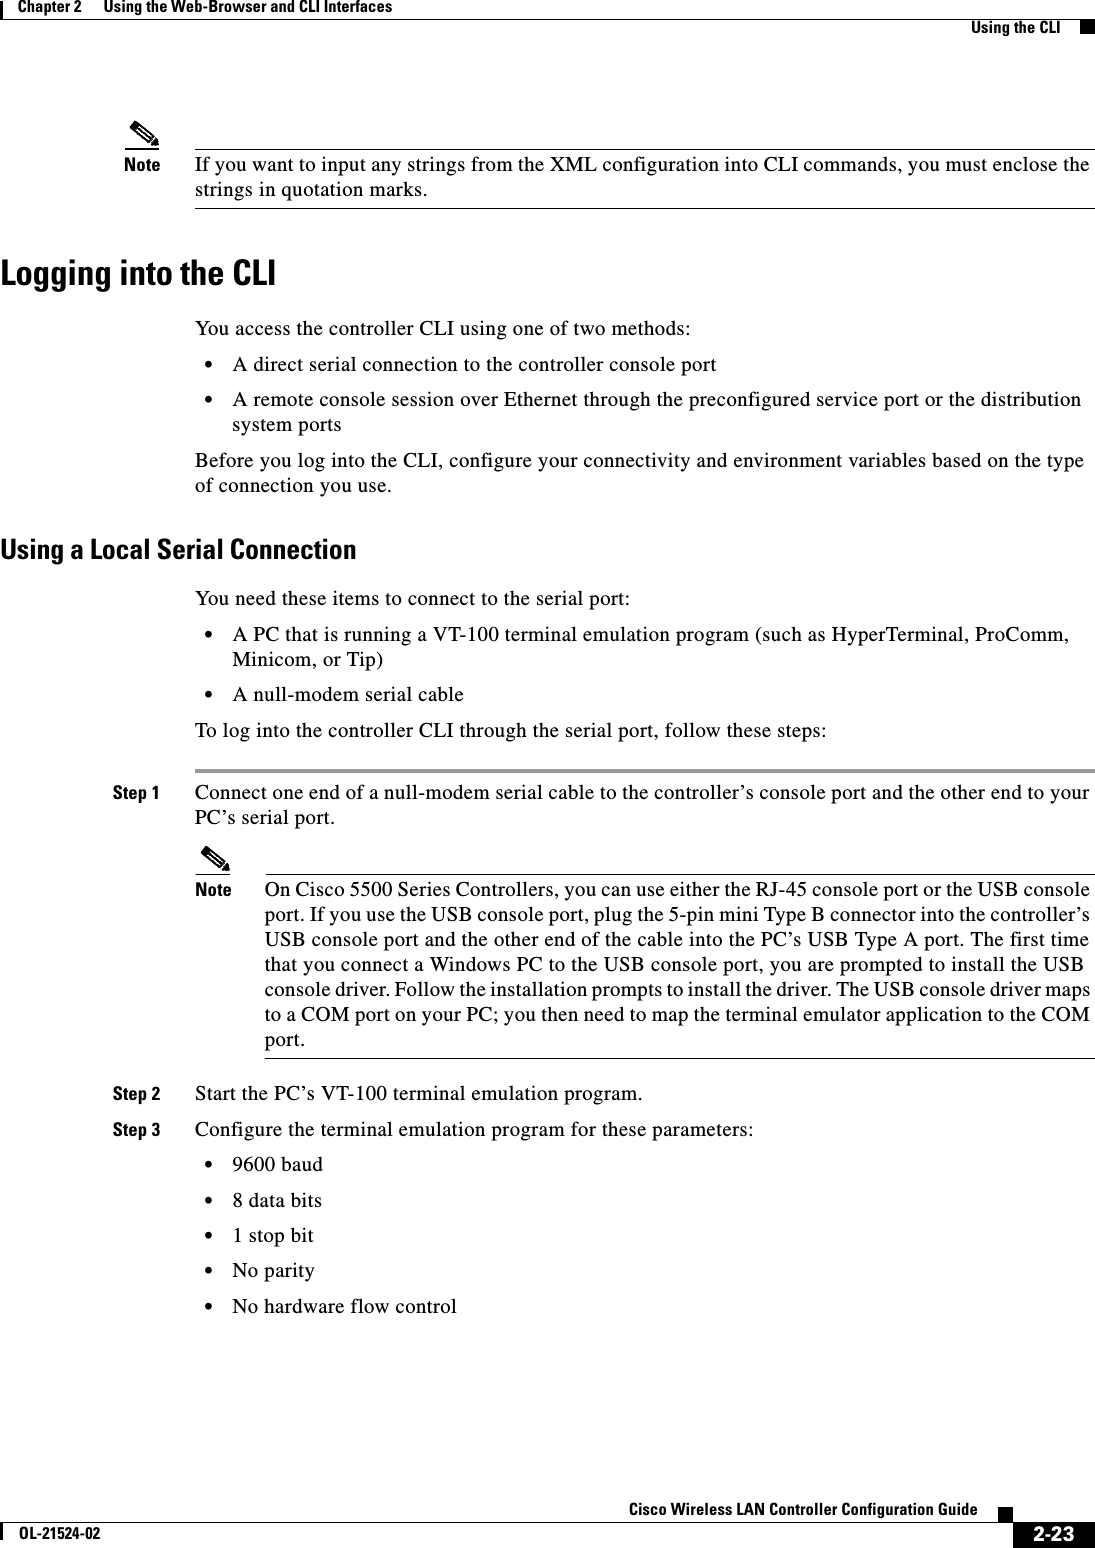  2-23Cisco Wireless LAN Controller Configuration GuideOL-21524-02Chapter 2      Using the Web-Browser and CLI InterfacesUsing the CLINote If you want to input any strings from the XML configuration into CLI commands, you must enclose the strings in quotation marks.Logging into the CLIYou access the controller CLI using one of two methods:  • A direct serial connection to the controller console port  • A remote console session over Ethernet through the preconfigured service port or the distribution system portsBefore you log into the CLI, configure your connectivity and environment variables based on the type of connection you use.Using a Local Serial ConnectionYou need these items to connect to the serial port:  • A PC that is running a VT-100 terminal emulation program (such as HyperTerminal, ProComm, Minicom, or Tip)  • A null-modem serial cableTo log into the controller CLI through the serial port, follow these steps:Step 1 Connect one end of a null-modem serial cable to the controller’s console port and the other end to your PC’s serial port.Note On Cisco 5500 Series Controllers, you can use either the RJ-45 console port or the USB console port. If you use the USB console port, plug the 5-pin mini Type B connector into the controller’s USB console port and the other end of the cable into the PC’s USB Type A port. The first time that you connect a Windows PC to the USB console port, you are prompted to install the USB console driver. Follow the installation prompts to install the driver. The USB console driver maps to a COM port on your PC; you then need to map the terminal emulator application to the COM port.Step 2 Start the PC’s VT-100 terminal emulation program.Step 3 Configure the terminal emulation program for these parameters:  • 9600 baud  • 8 data bits  • 1 stop bit  • No parity  • No hardware flow control